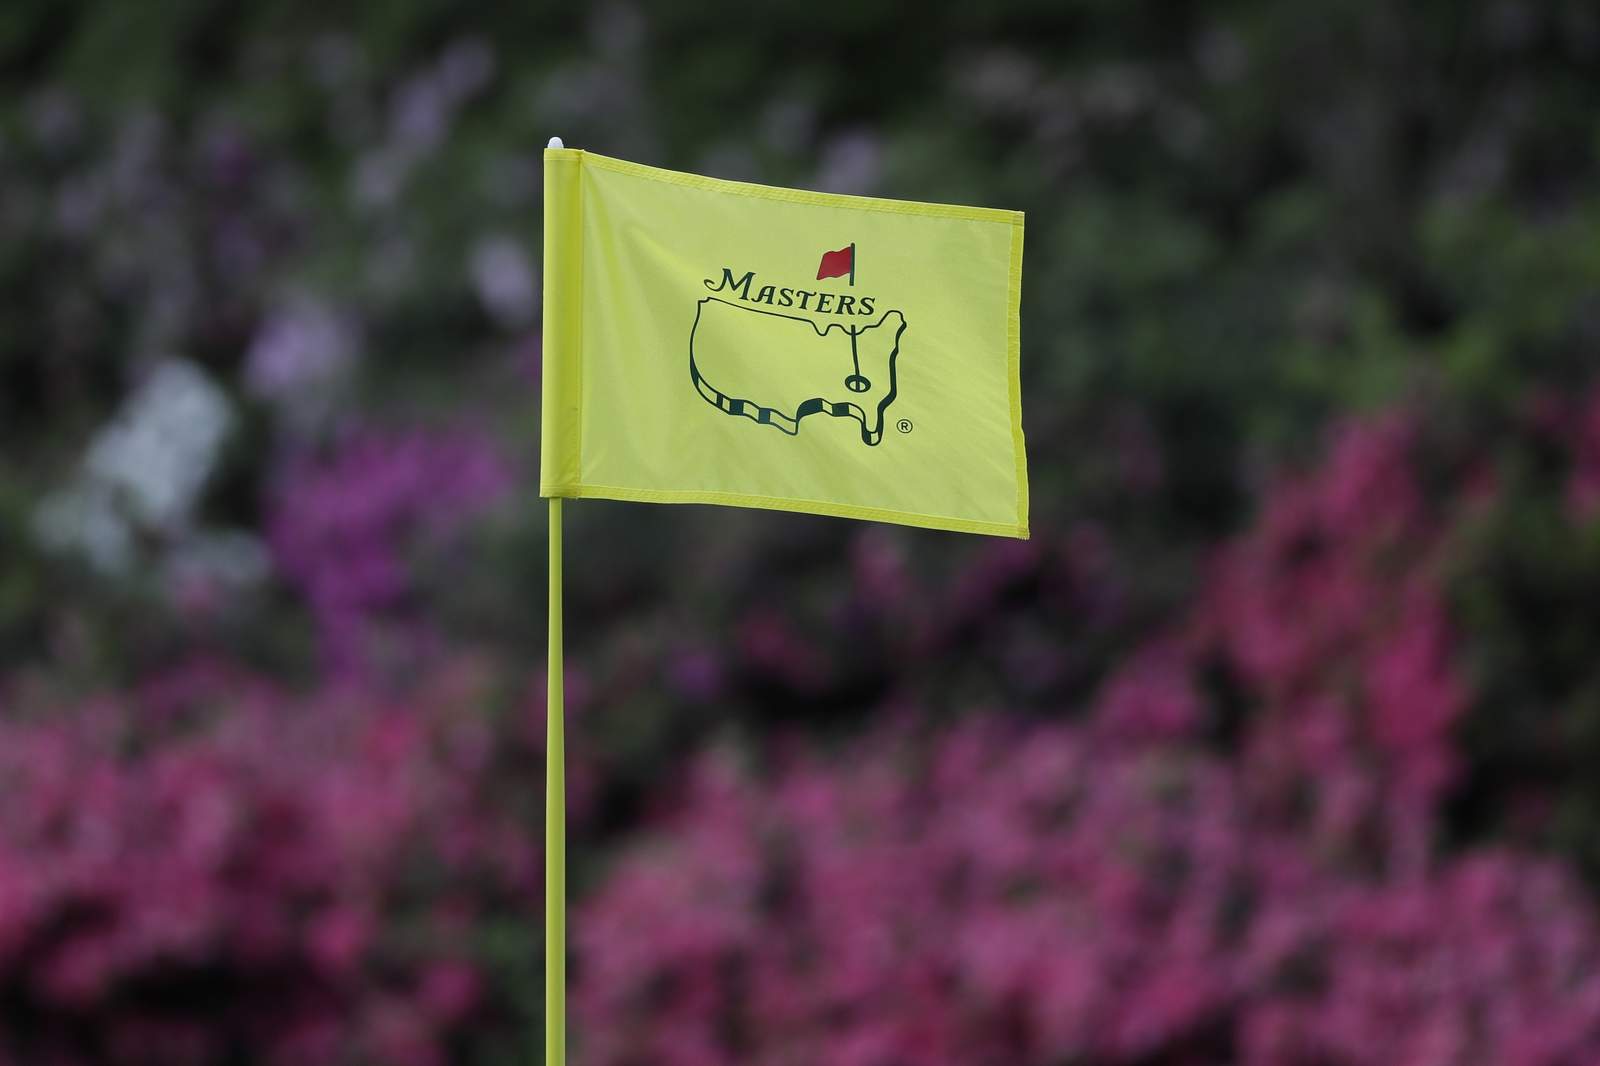 No roars at Augusta as Masters to be played without fans